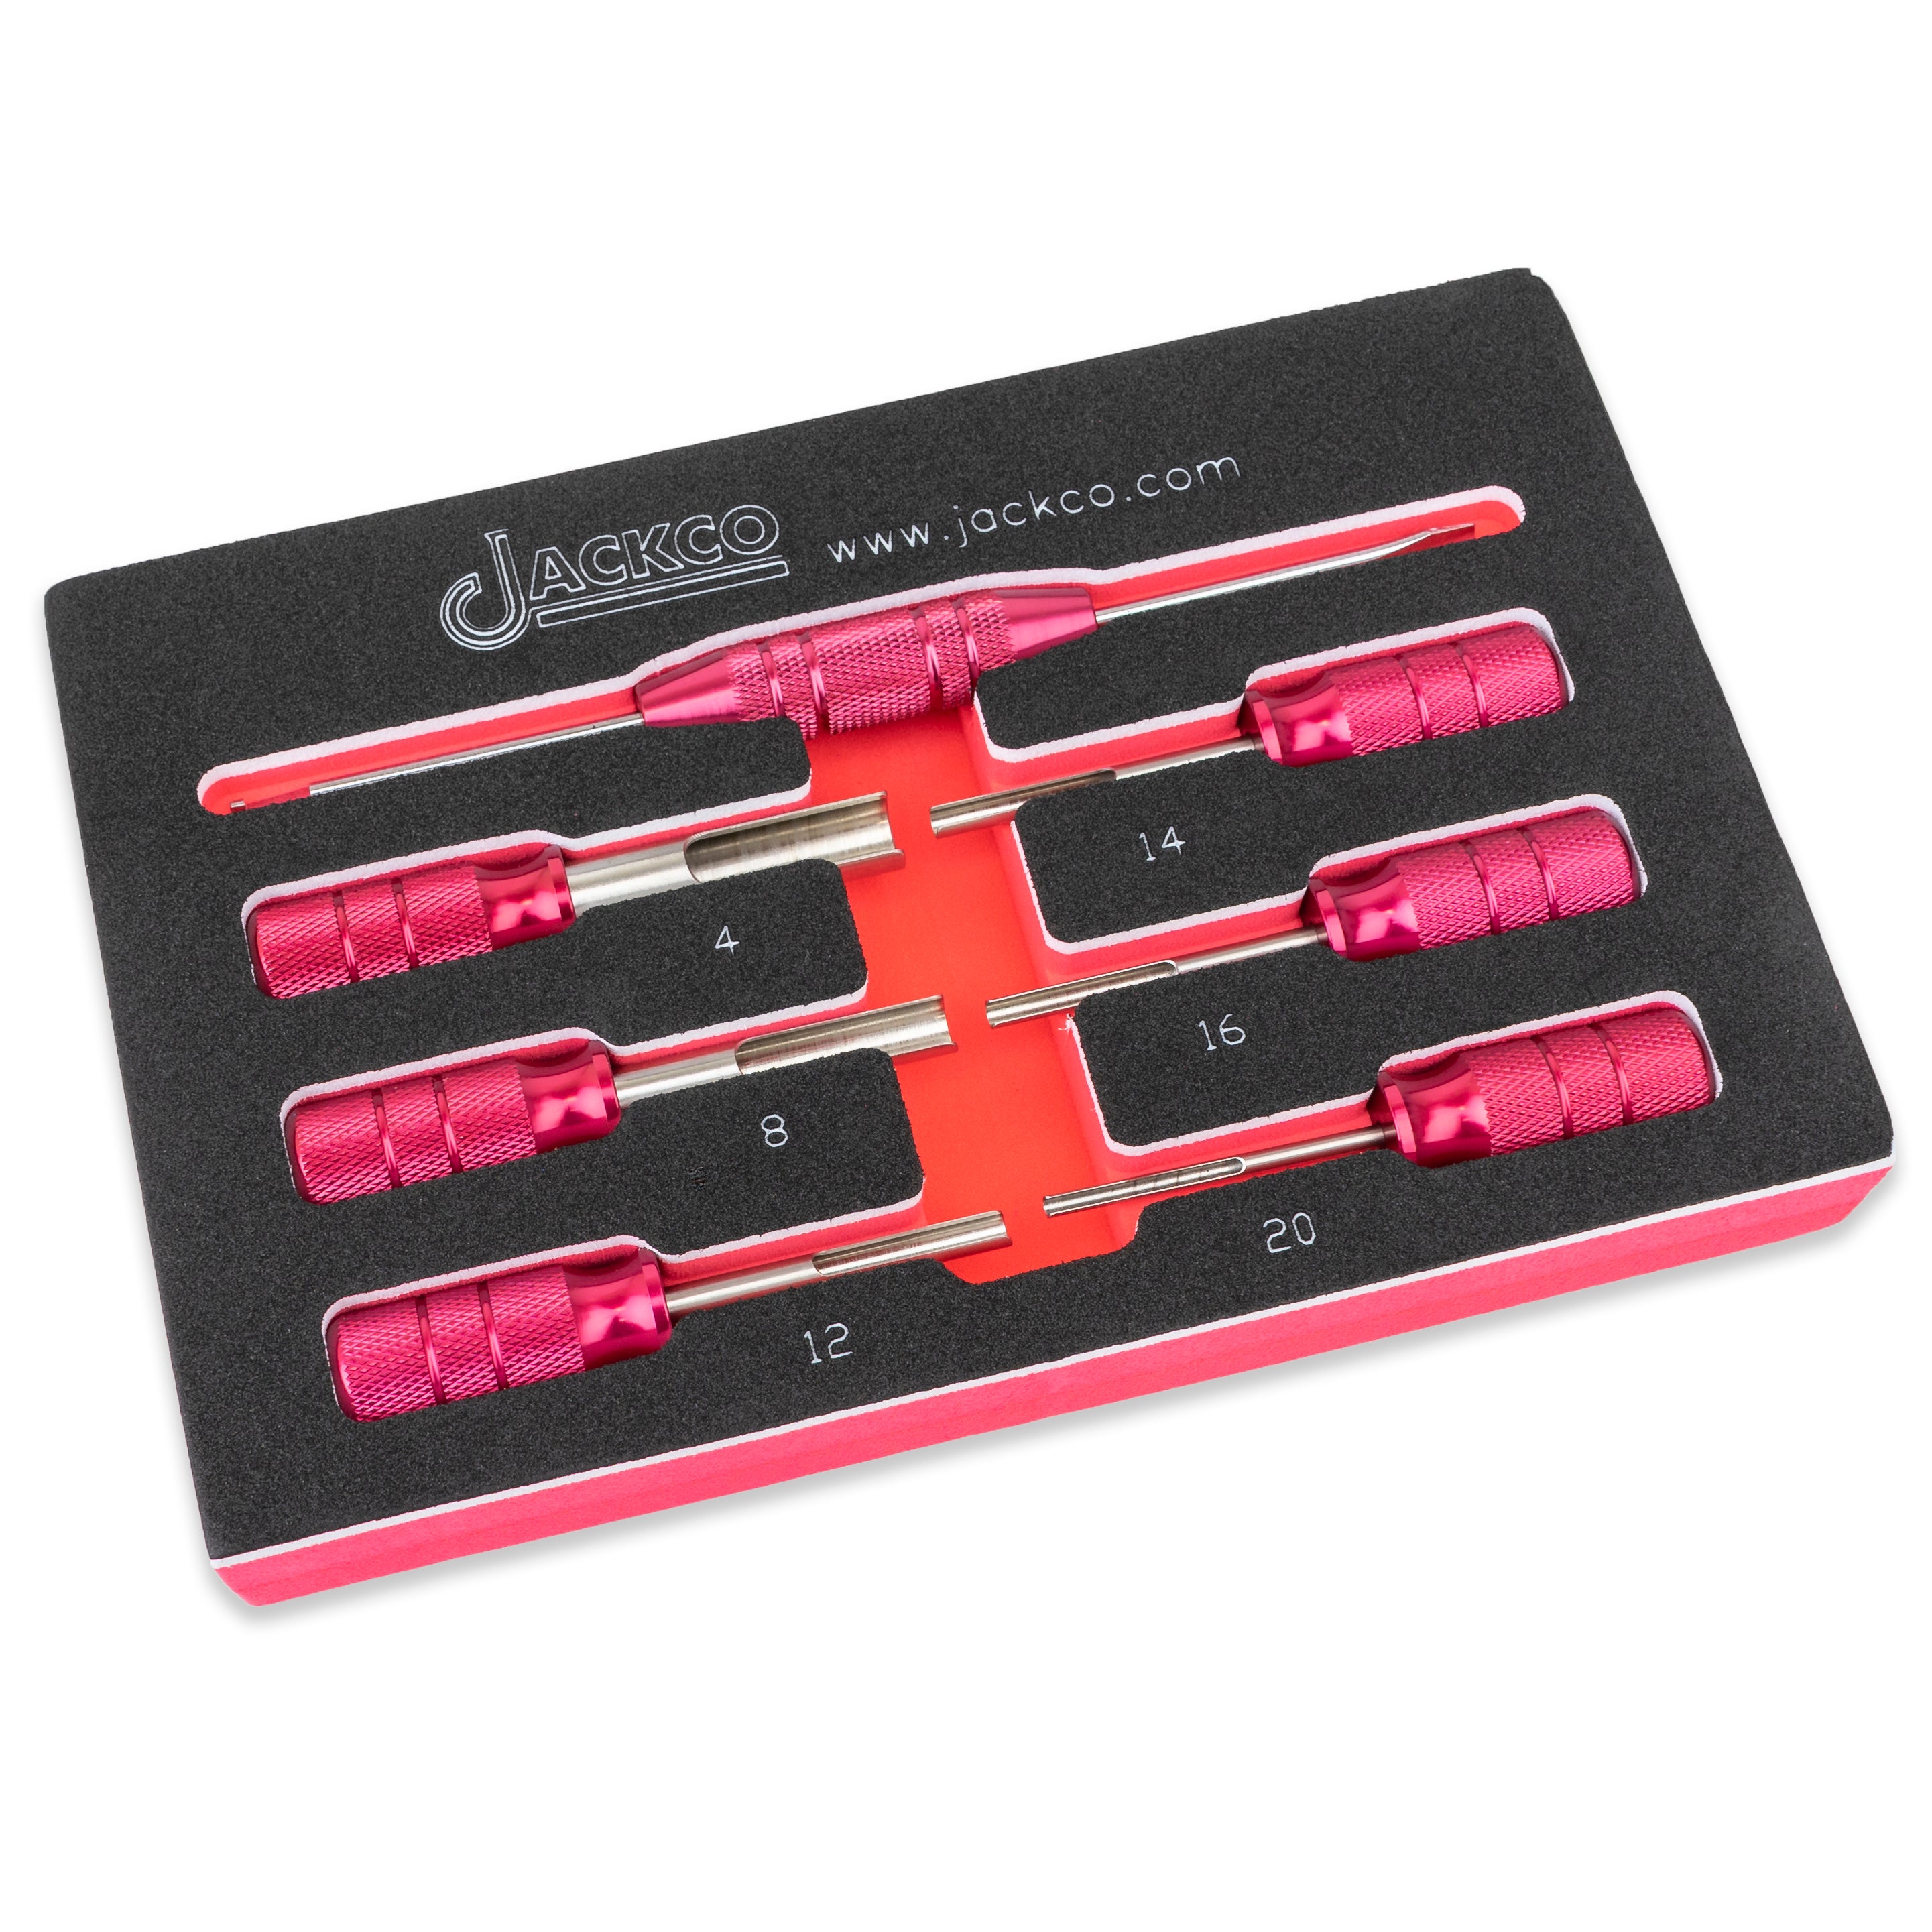 7pc Deutsch Terminal Release/Removal Tool Kit - 4, 8, 12, 14, 16, and 20 Gauge Wire Terminals - Tool Guy Republic